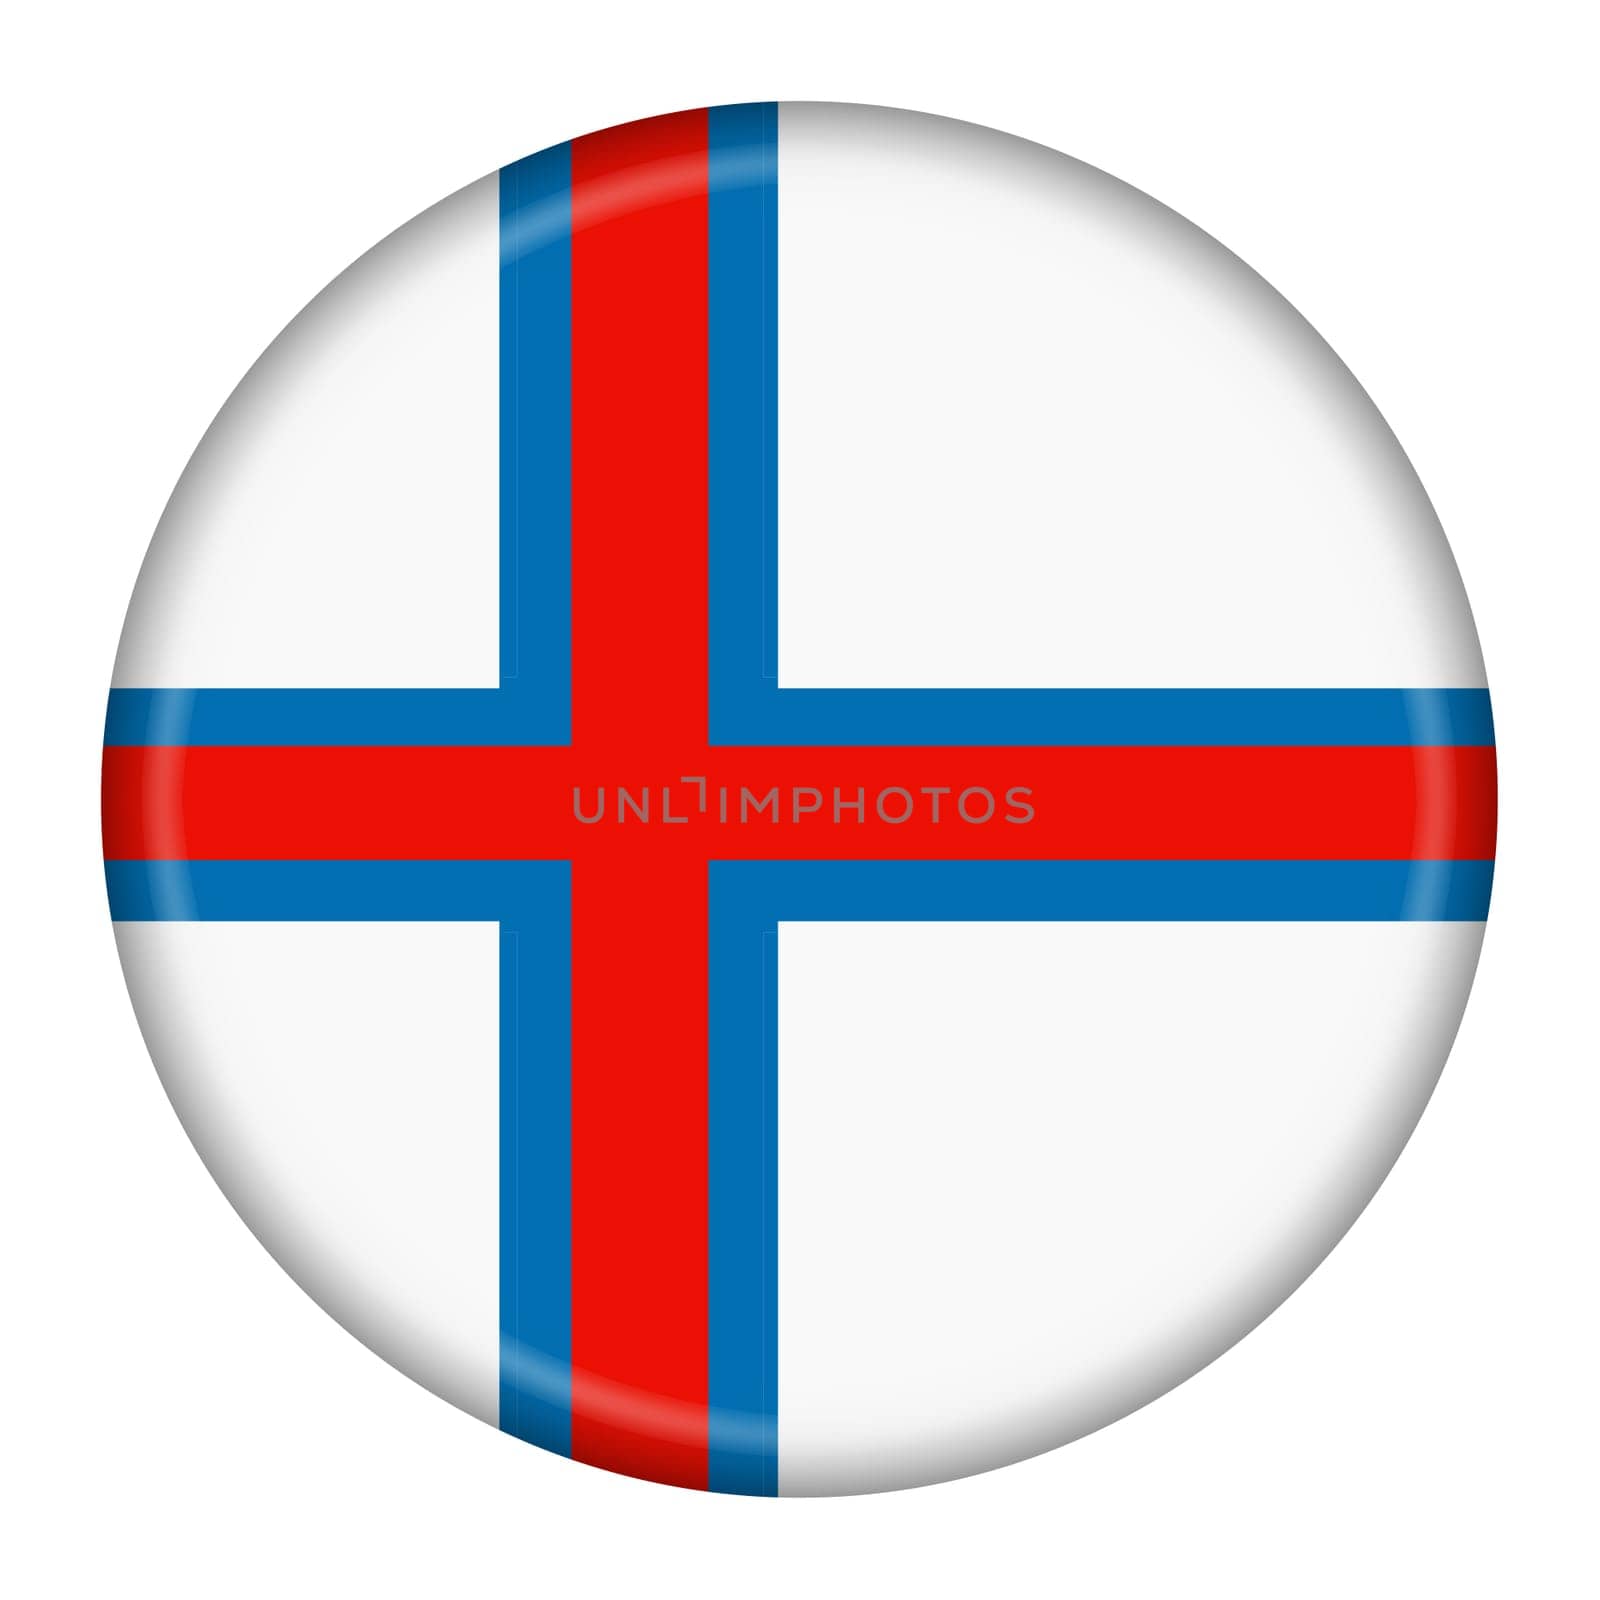 Faroe Islands flag button 3d illustration with clipping path by VivacityImages